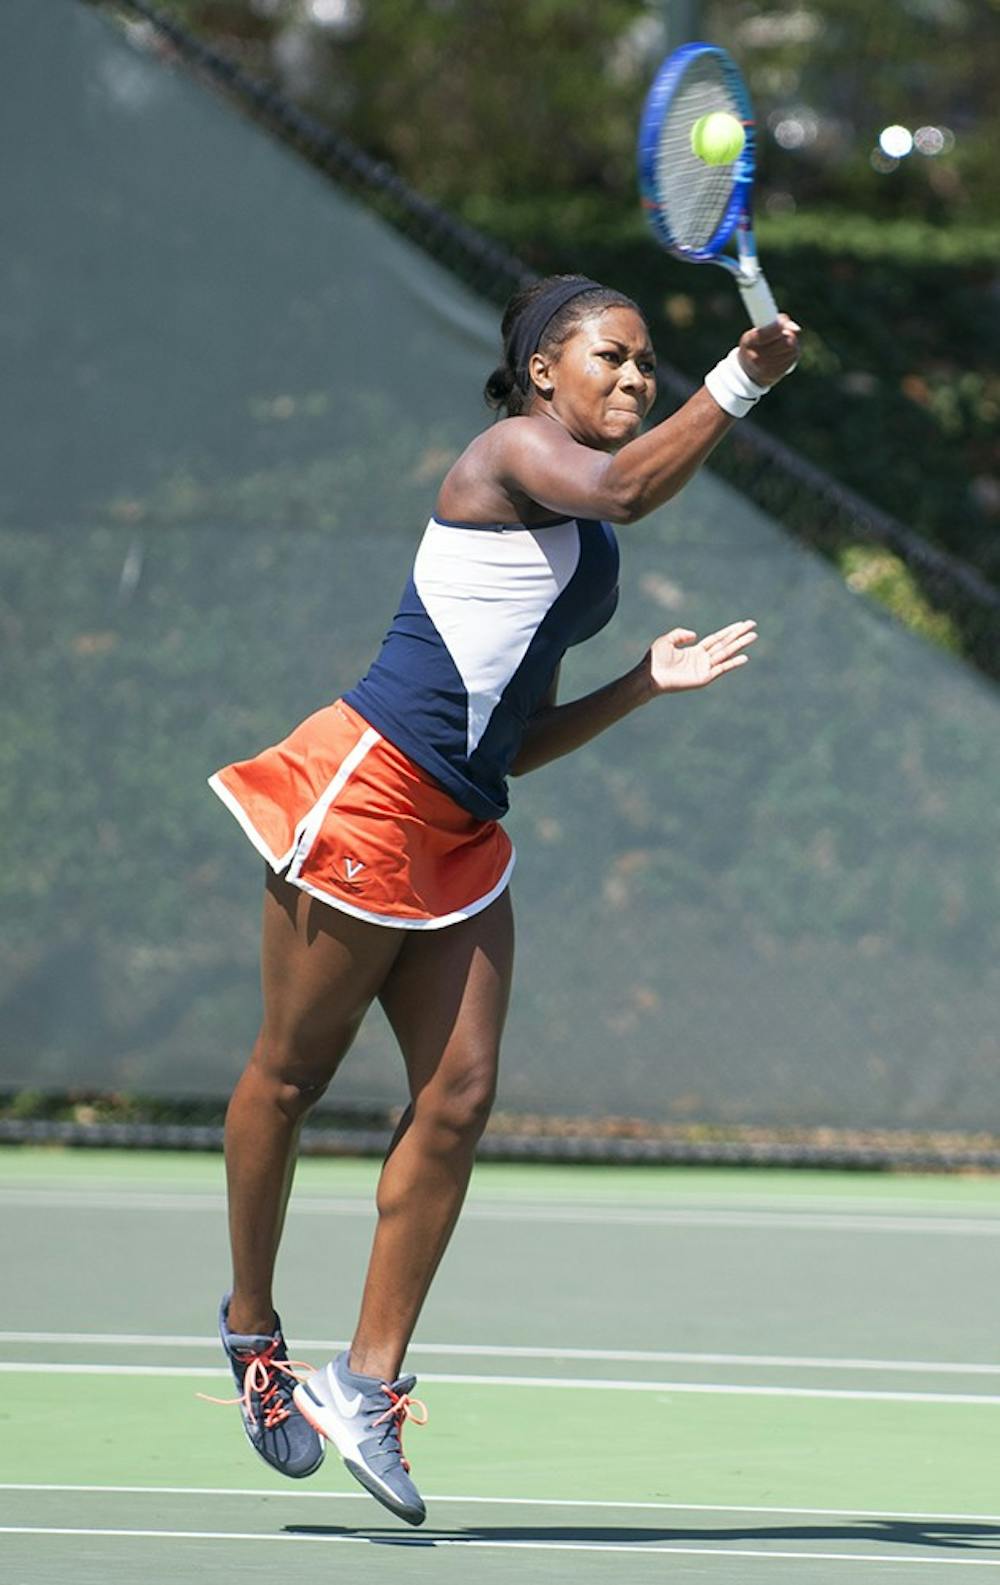 <p>Senior Skylar Morton, a former transfer from UCLA, won her singles match 6-2, 7-5 and, with Virginia senior Julia Elbaba, her doubles match 6-1 Sunday. The deep Cavaliers defeated Louisville, 6-1, and Norfolk State, 7-0.&nbsp;</p>